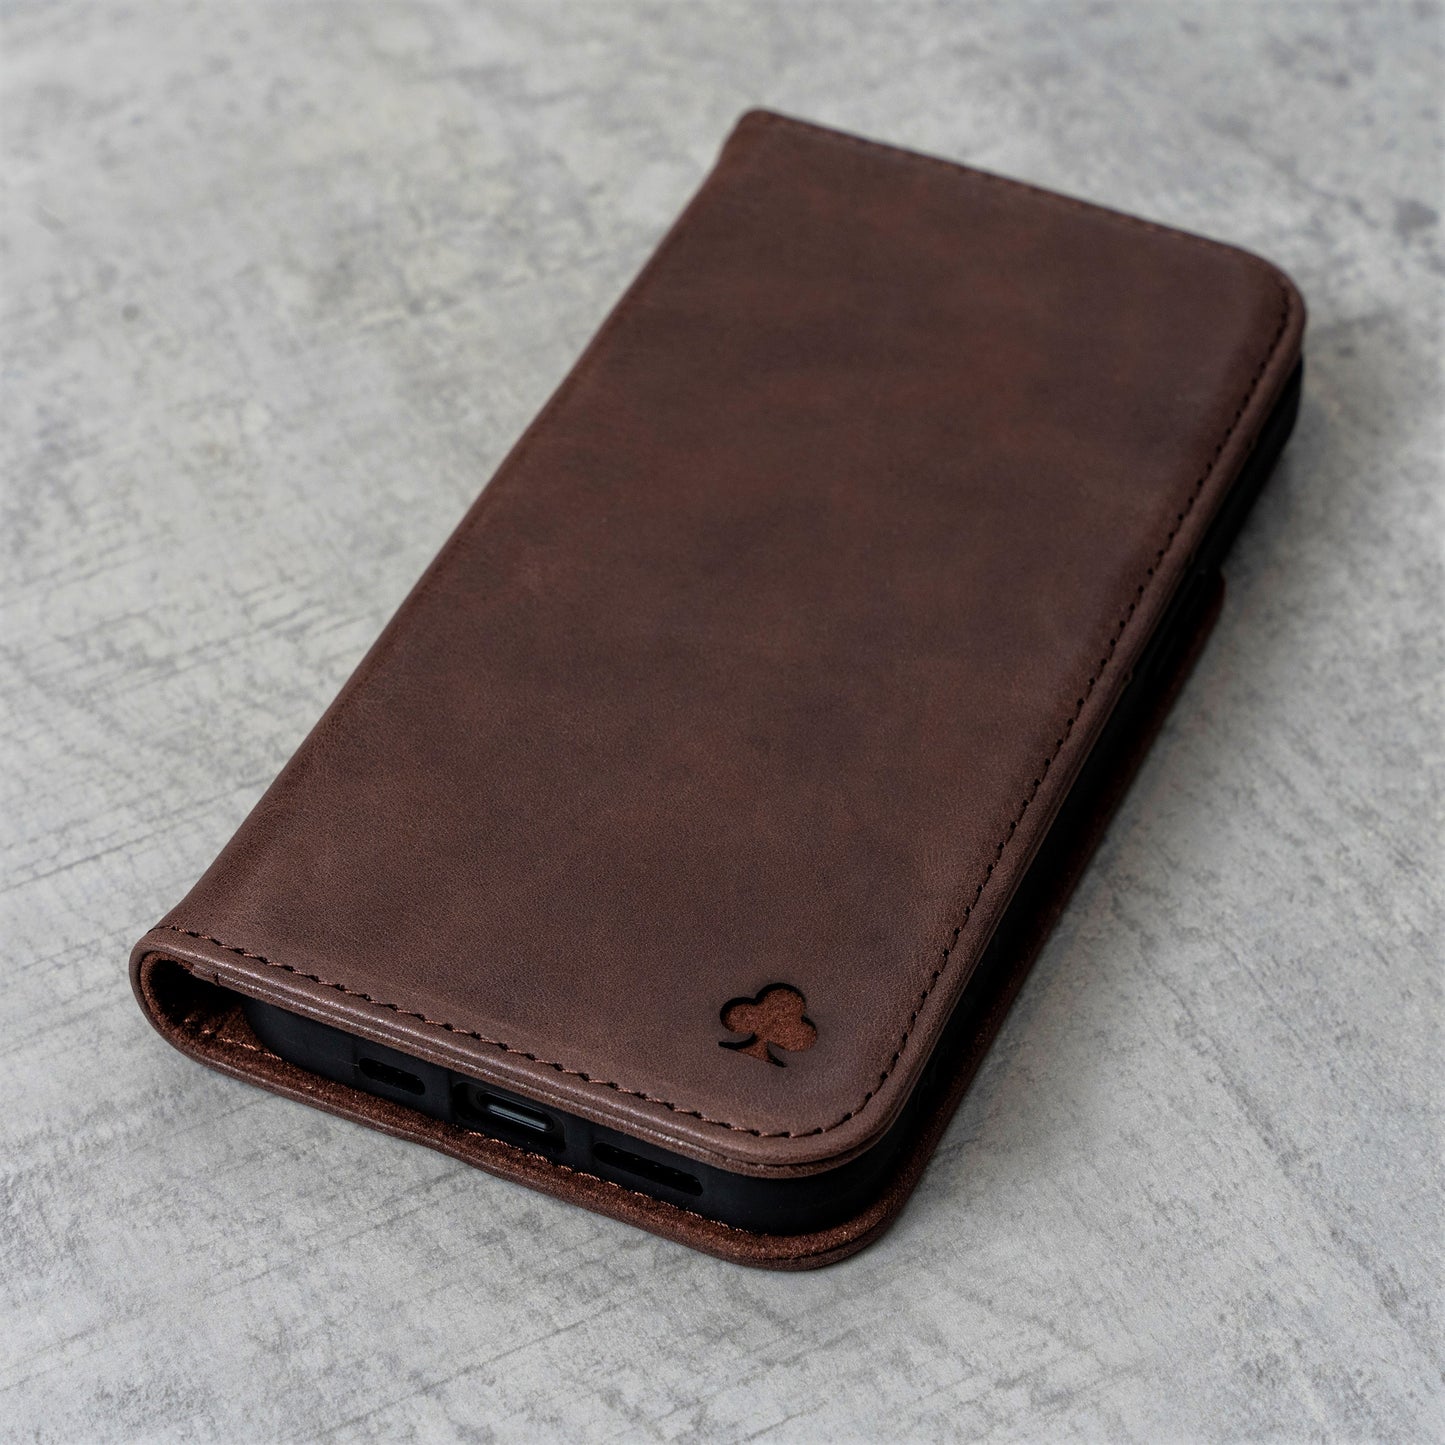 iPhone 12 Leather Case. Premium Slim Genuine Leather Stand Case/Cover/Wallet (Chocolate Brown)